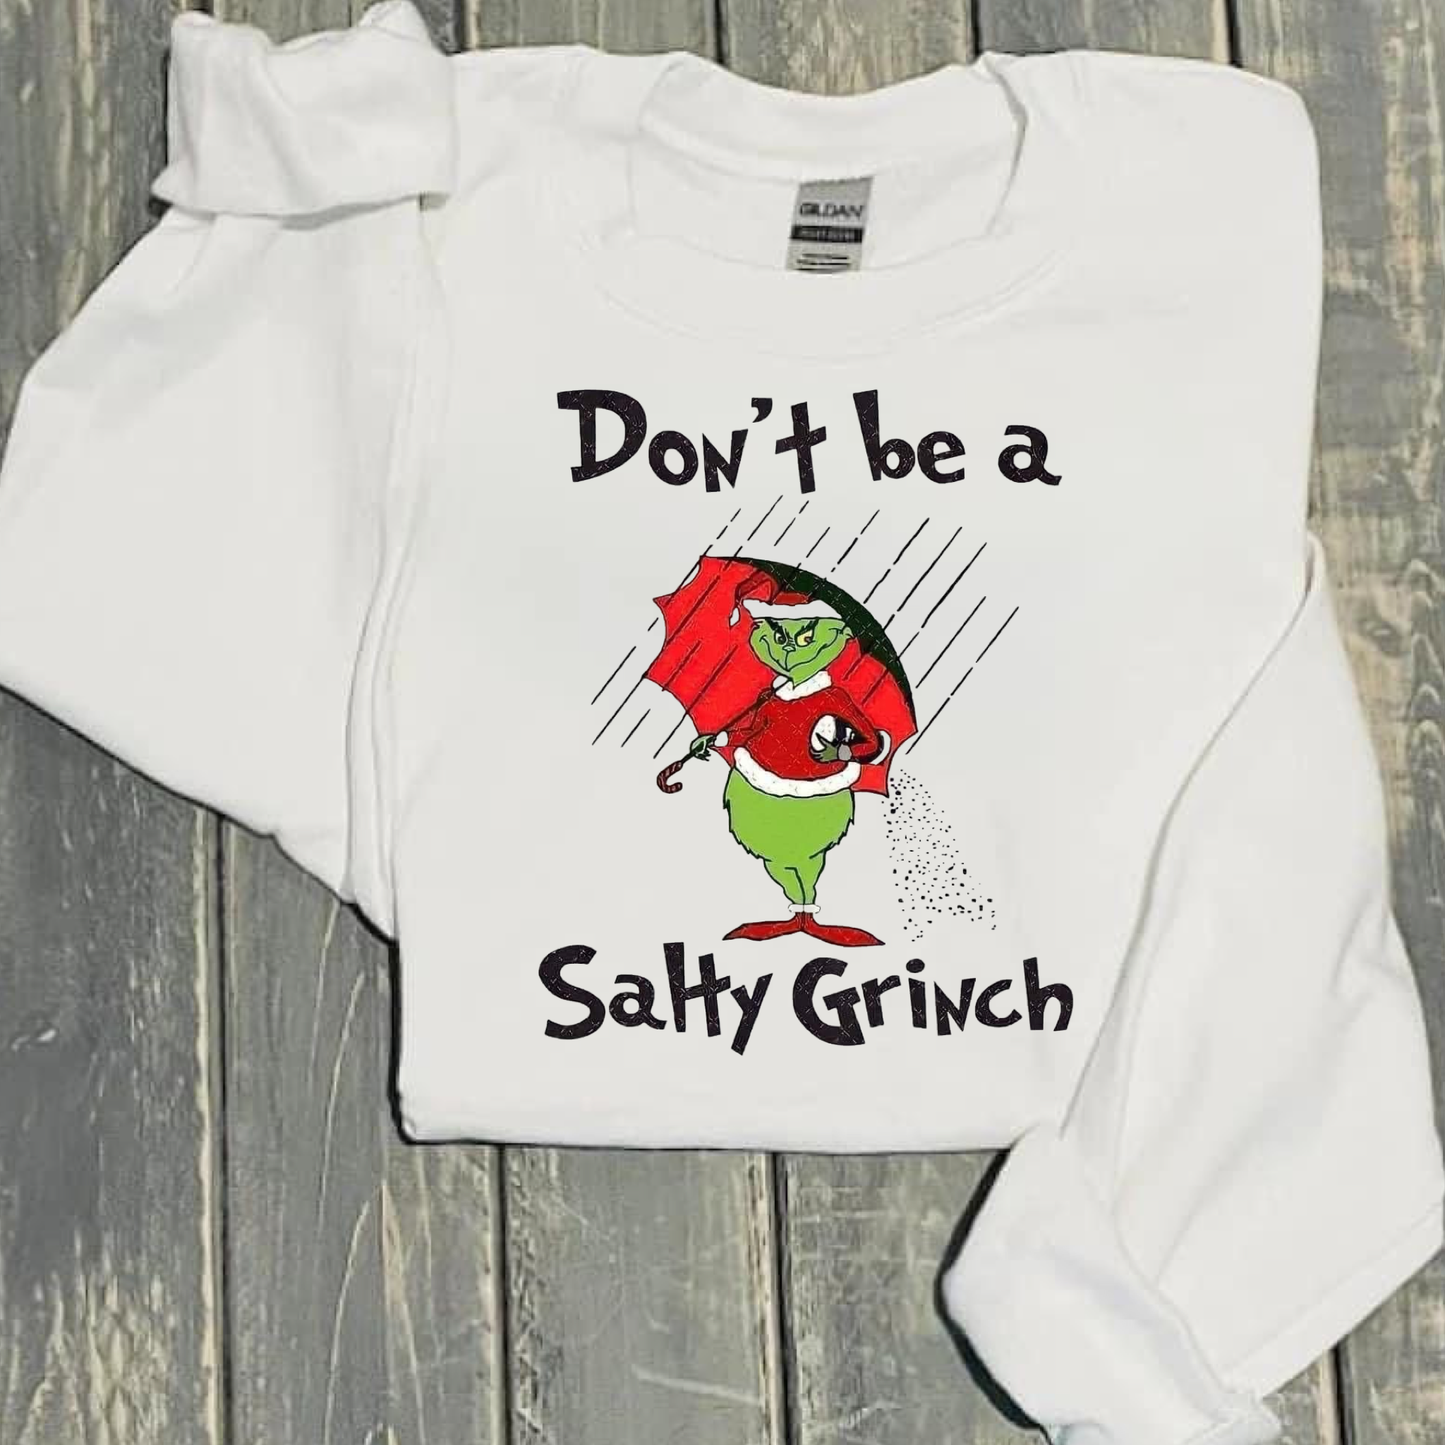 Don’t be a salty grinch